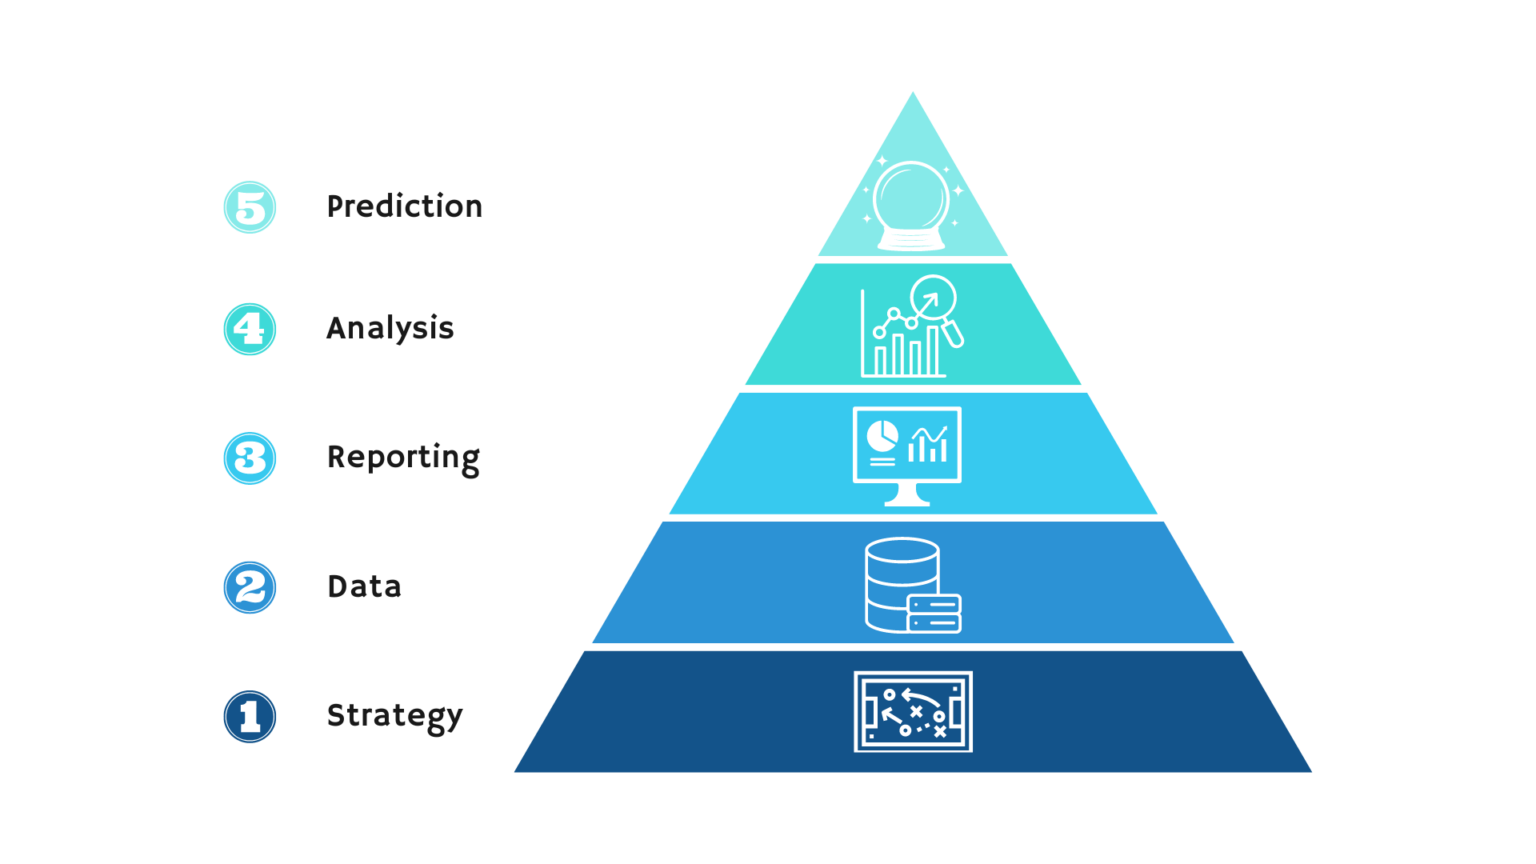 The five levels of the data analytics pyramid. Strategy, Data, Reporting, Analysis and Prediction.